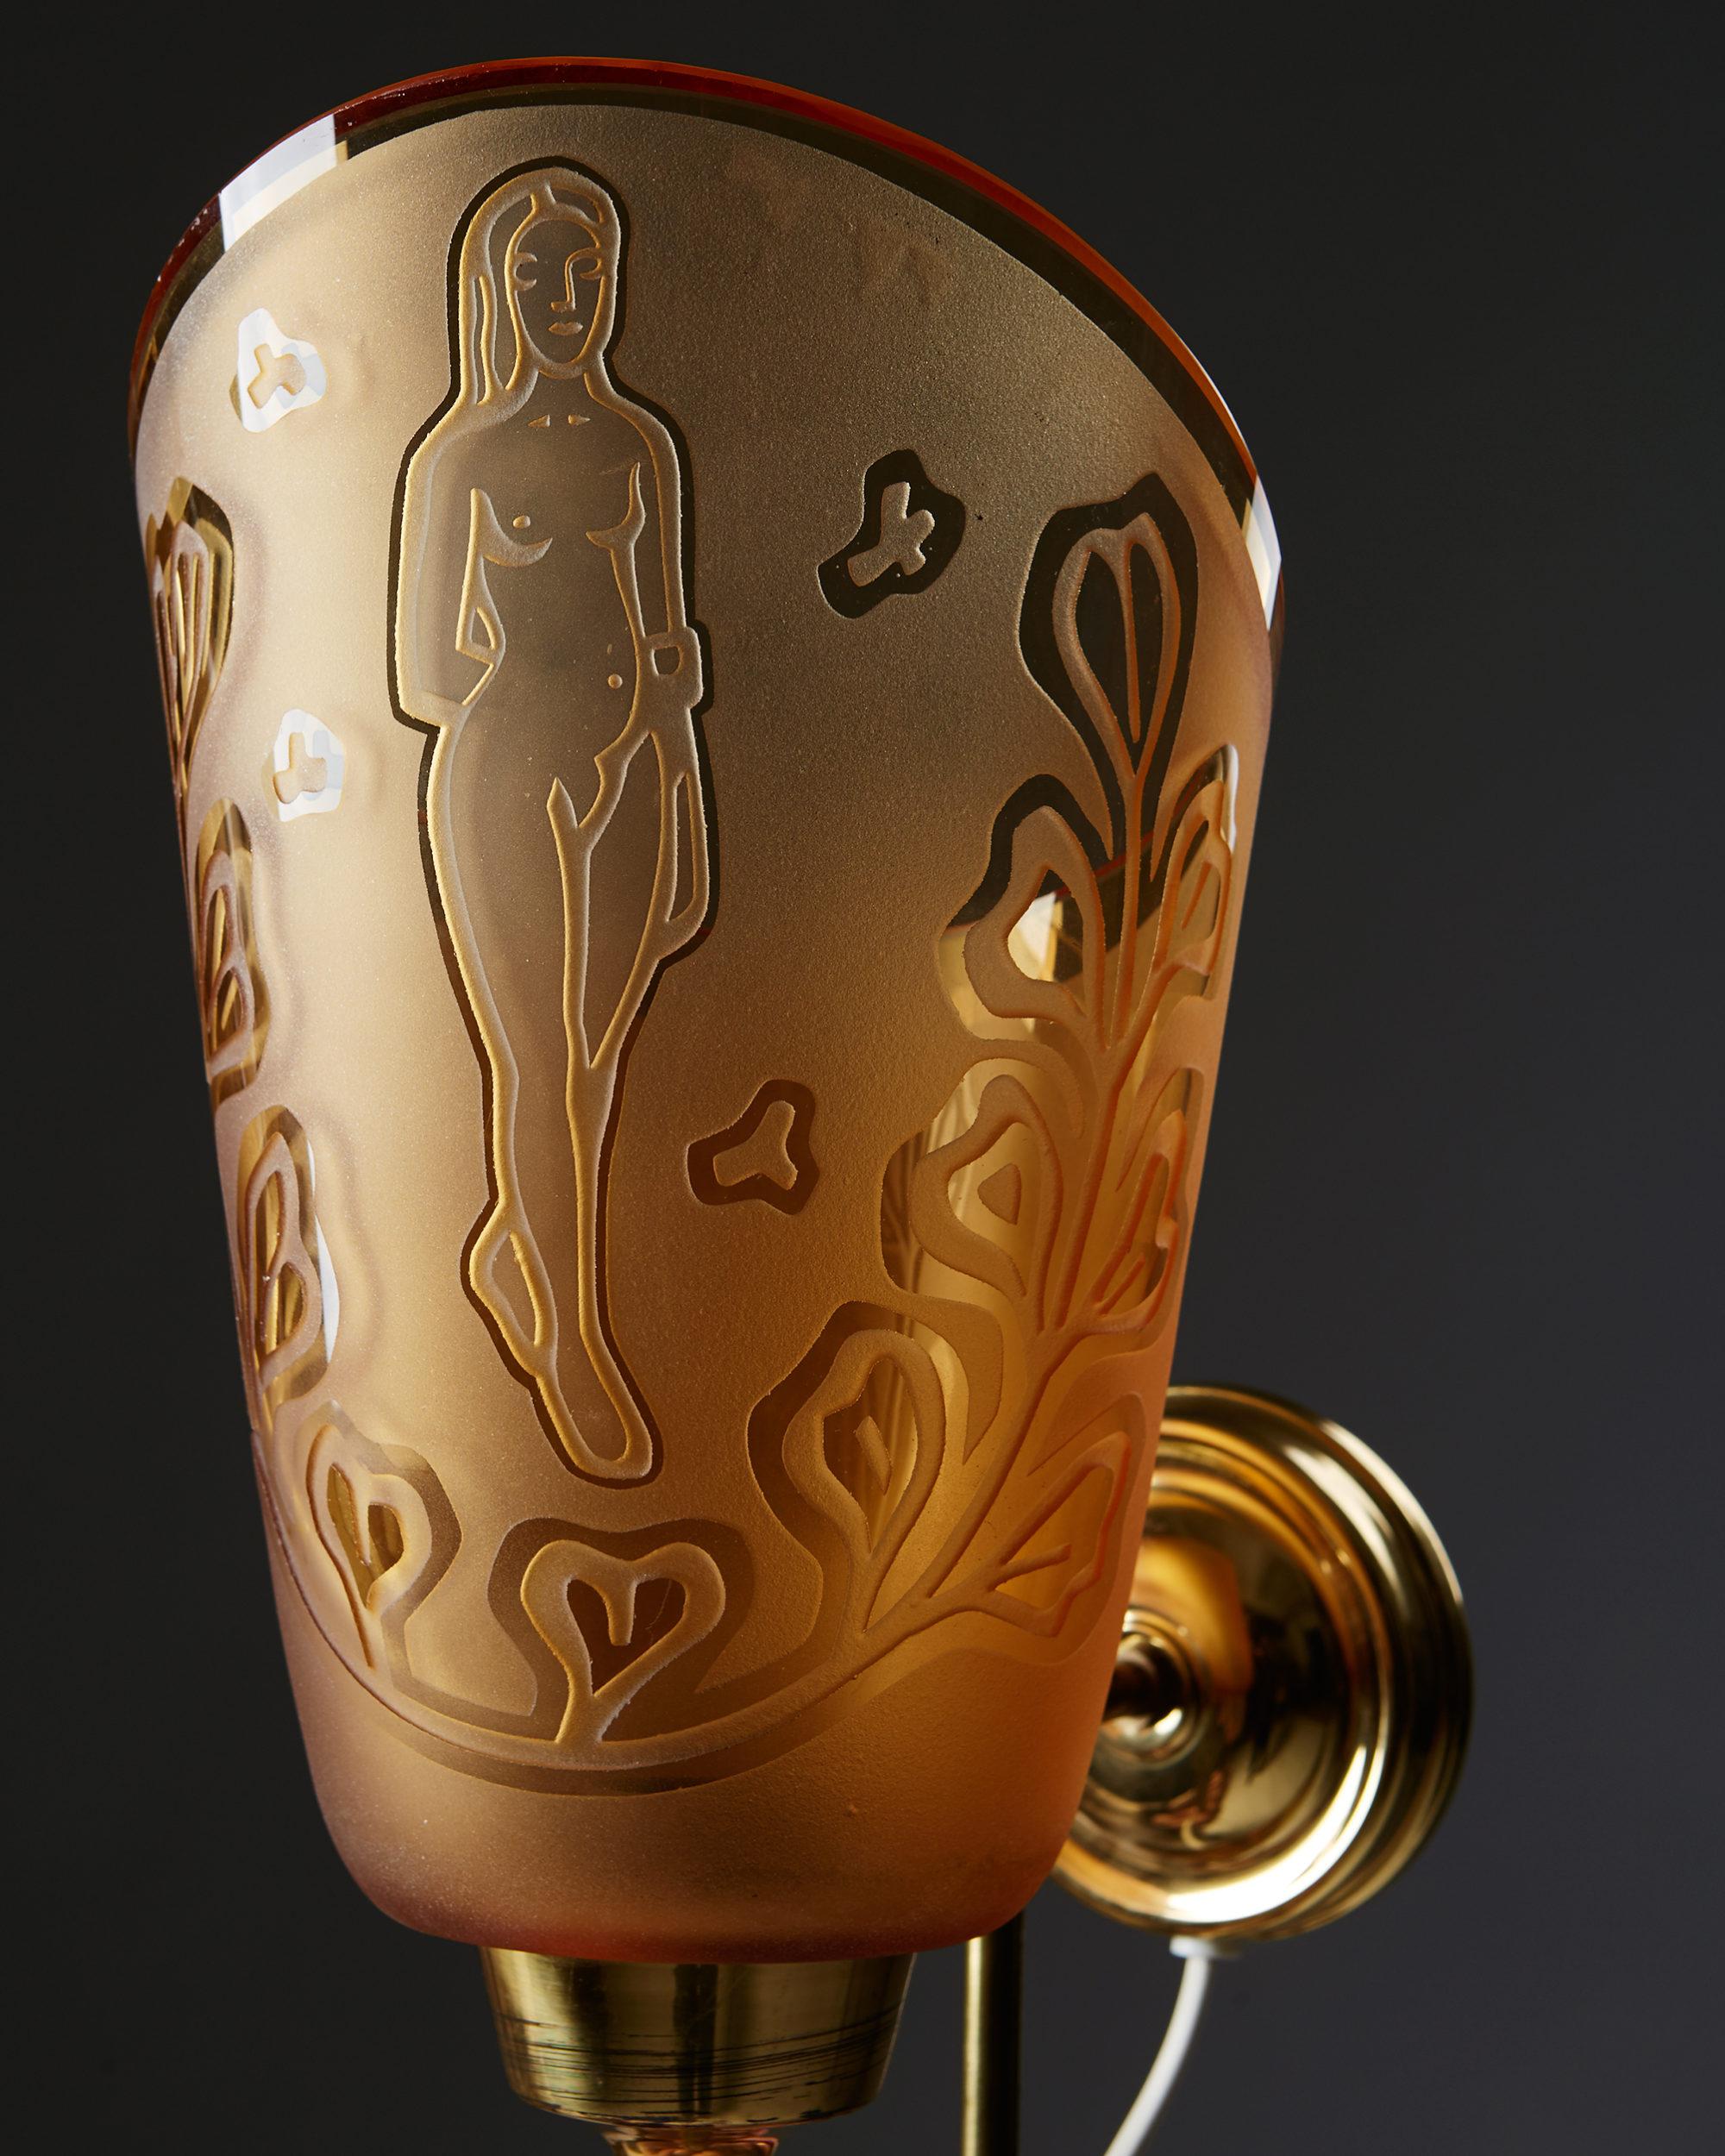 Engraved glass and brass.

Measures: H 41 cm/ 16